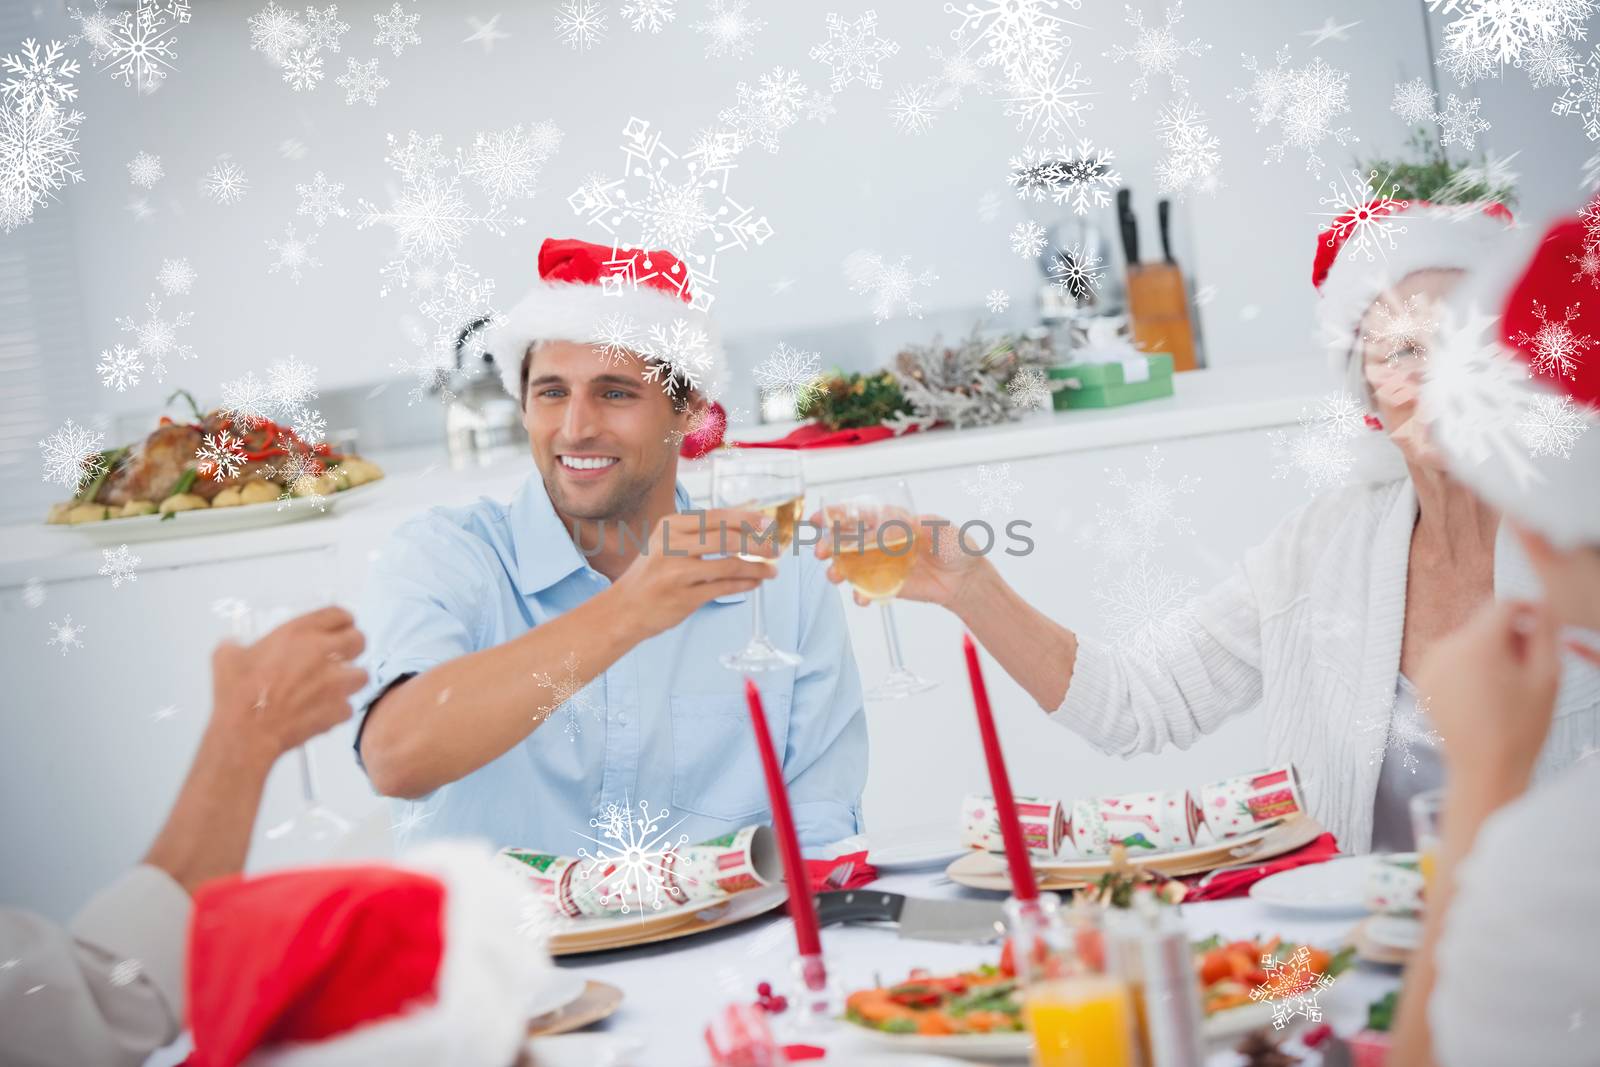 Happy family clinking their glasses of white wine against snowflakes